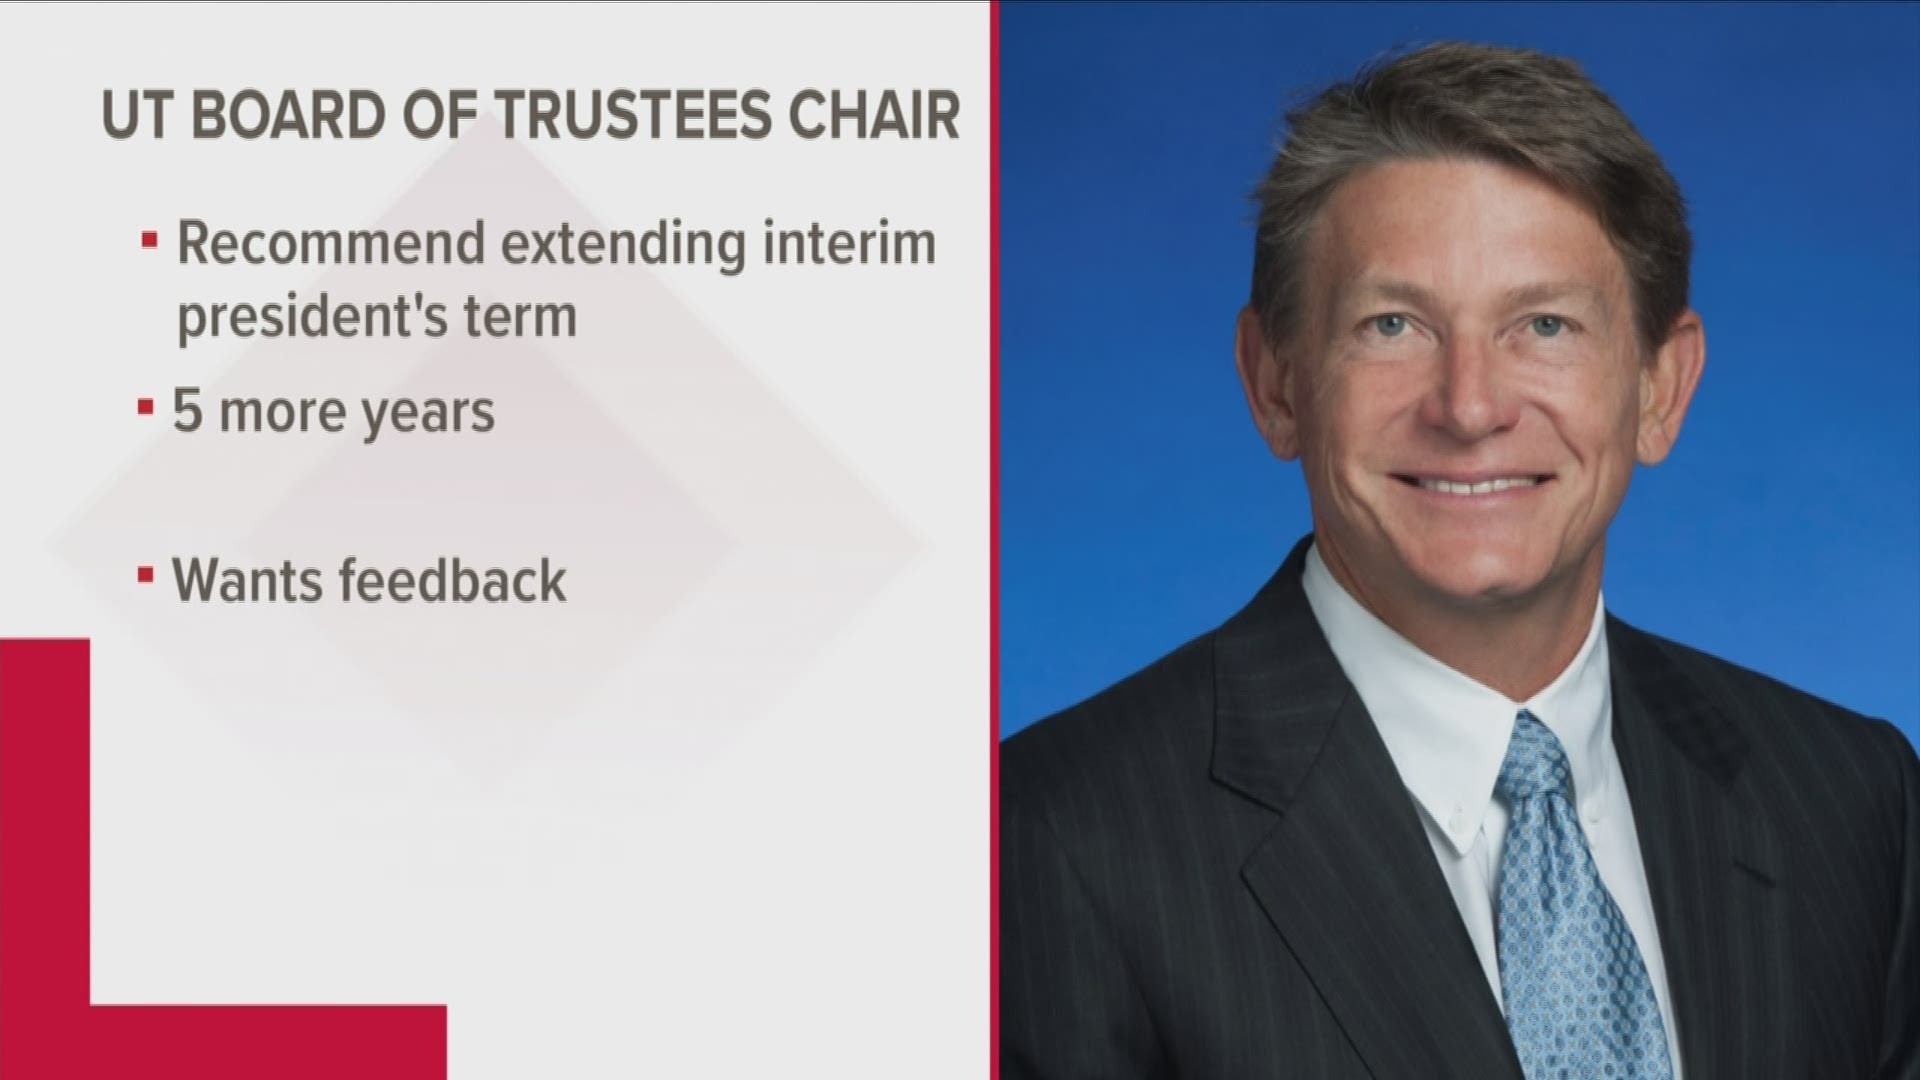 The University of Tennessee Board of Trustees Chair, John Comptom, recommended extending Randy Boyd's term by five years.